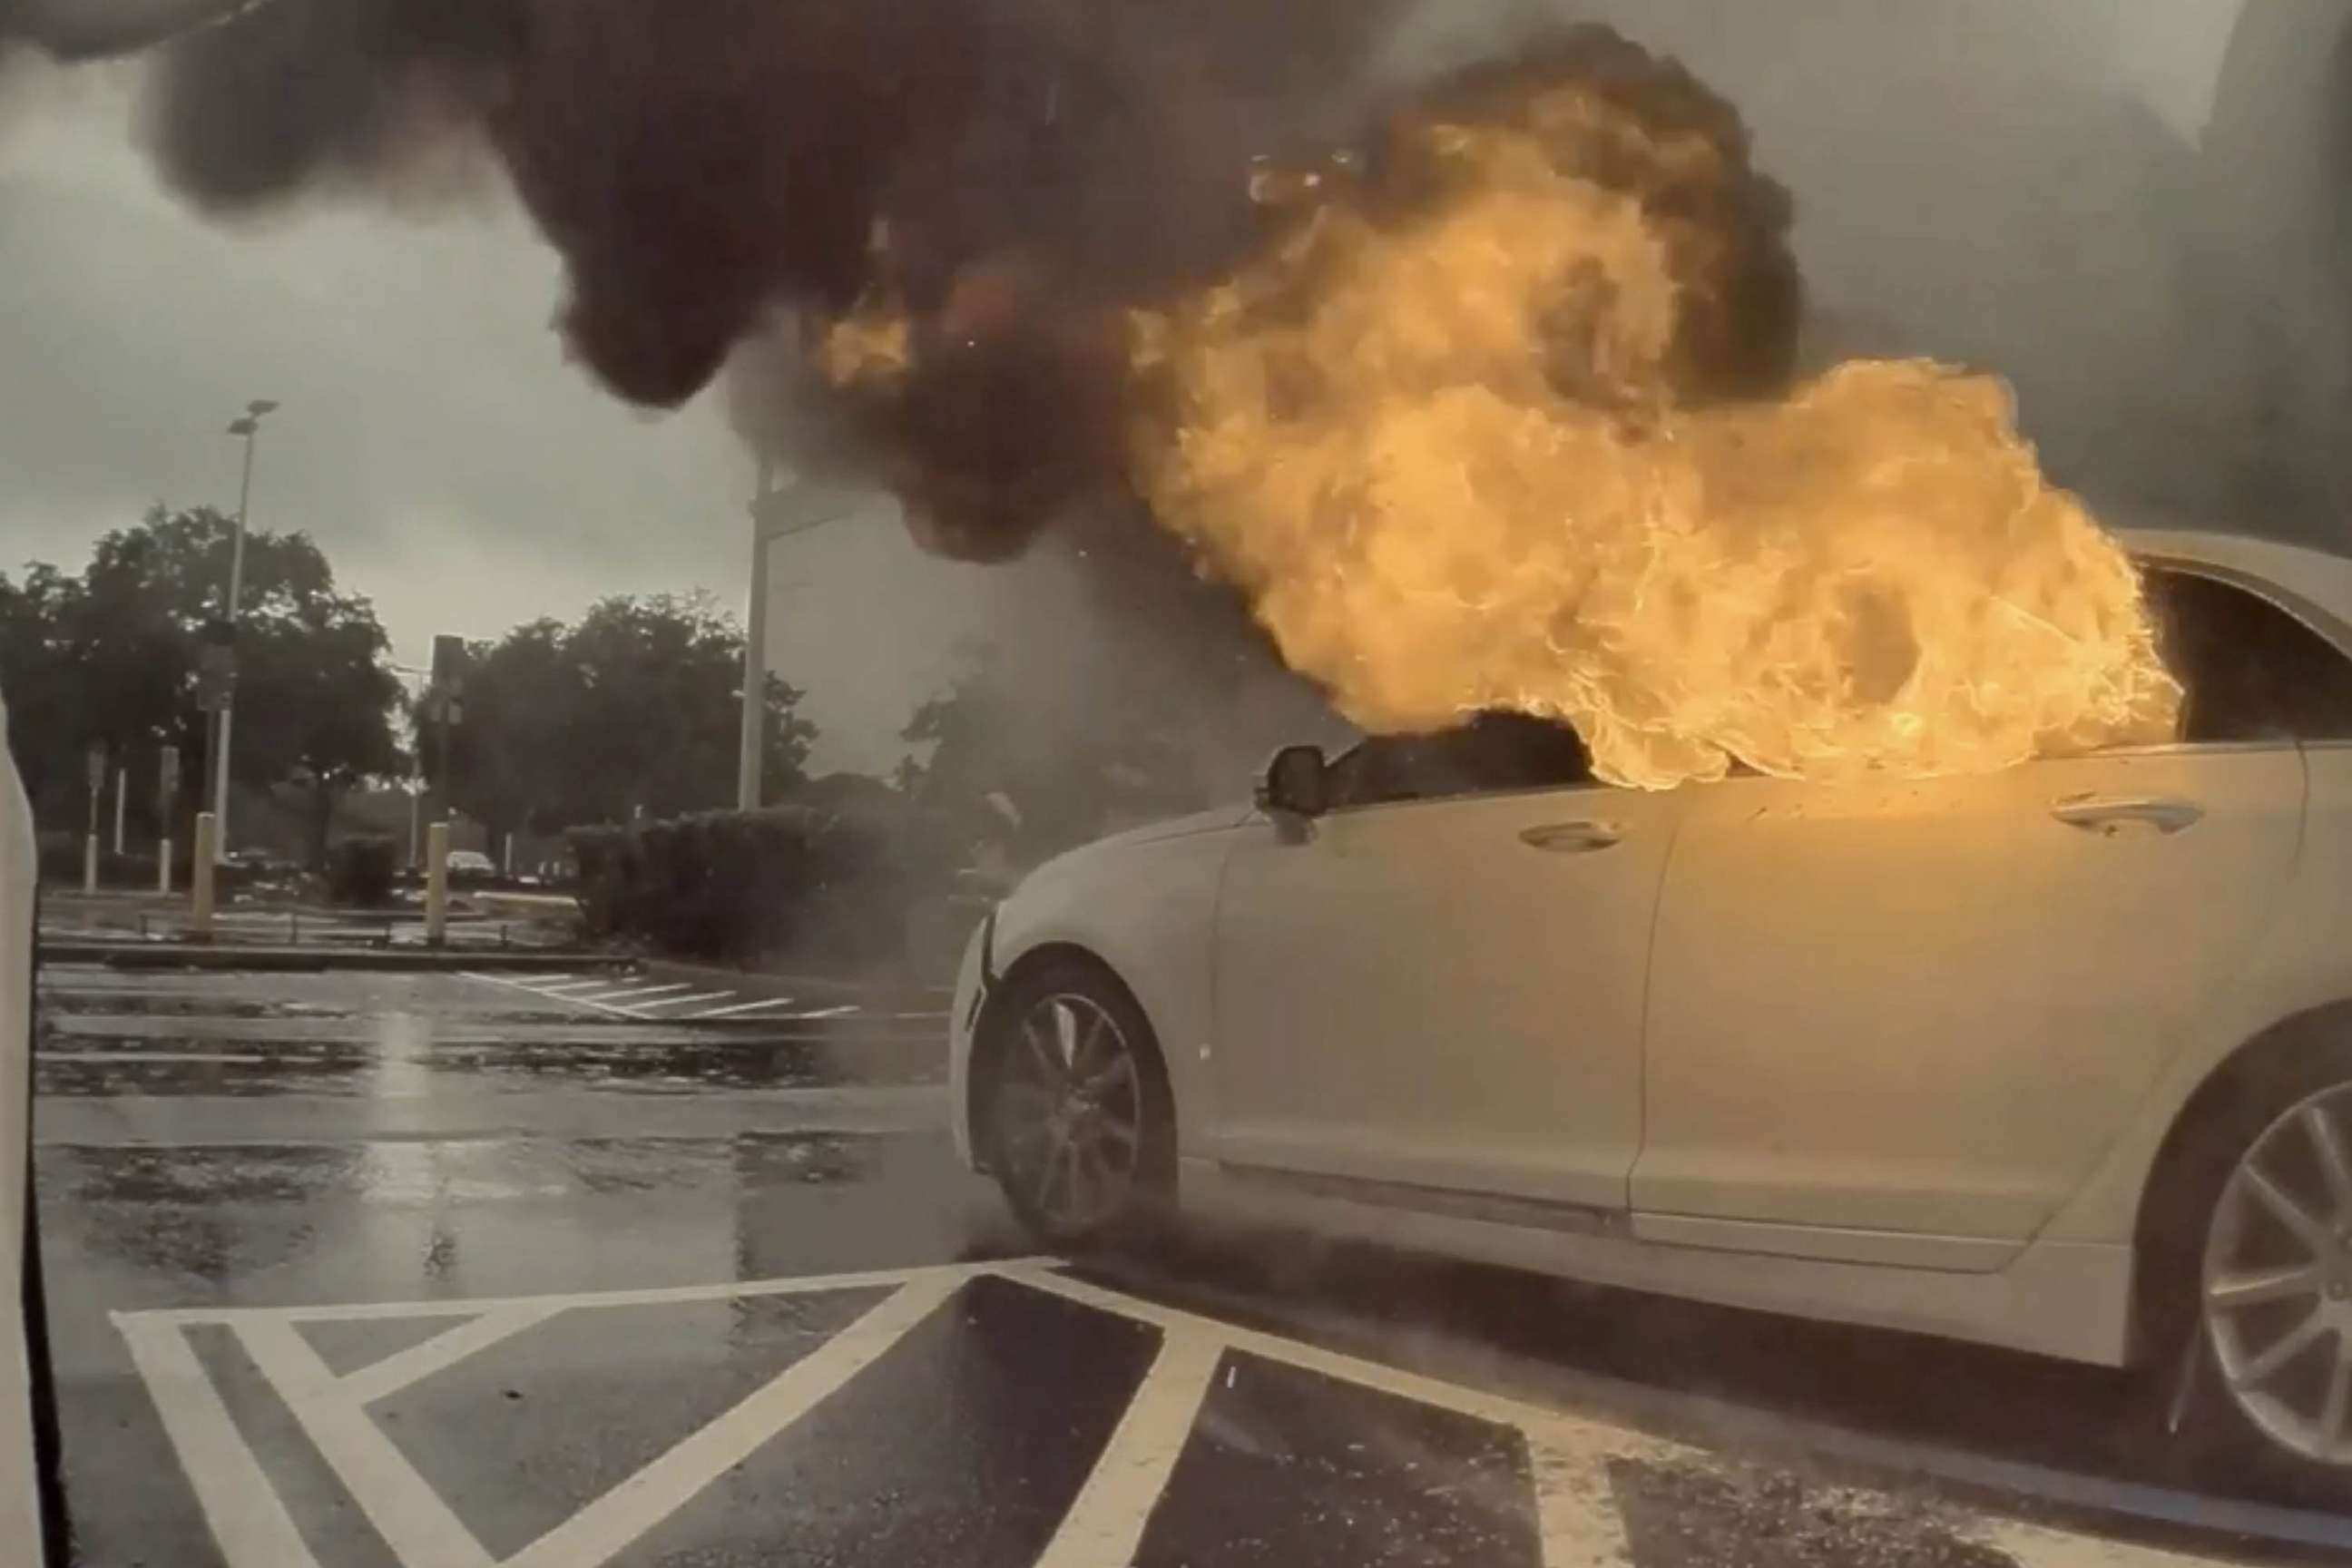 PHOTO: Woman leaves children in car that catches fire while shoplifting